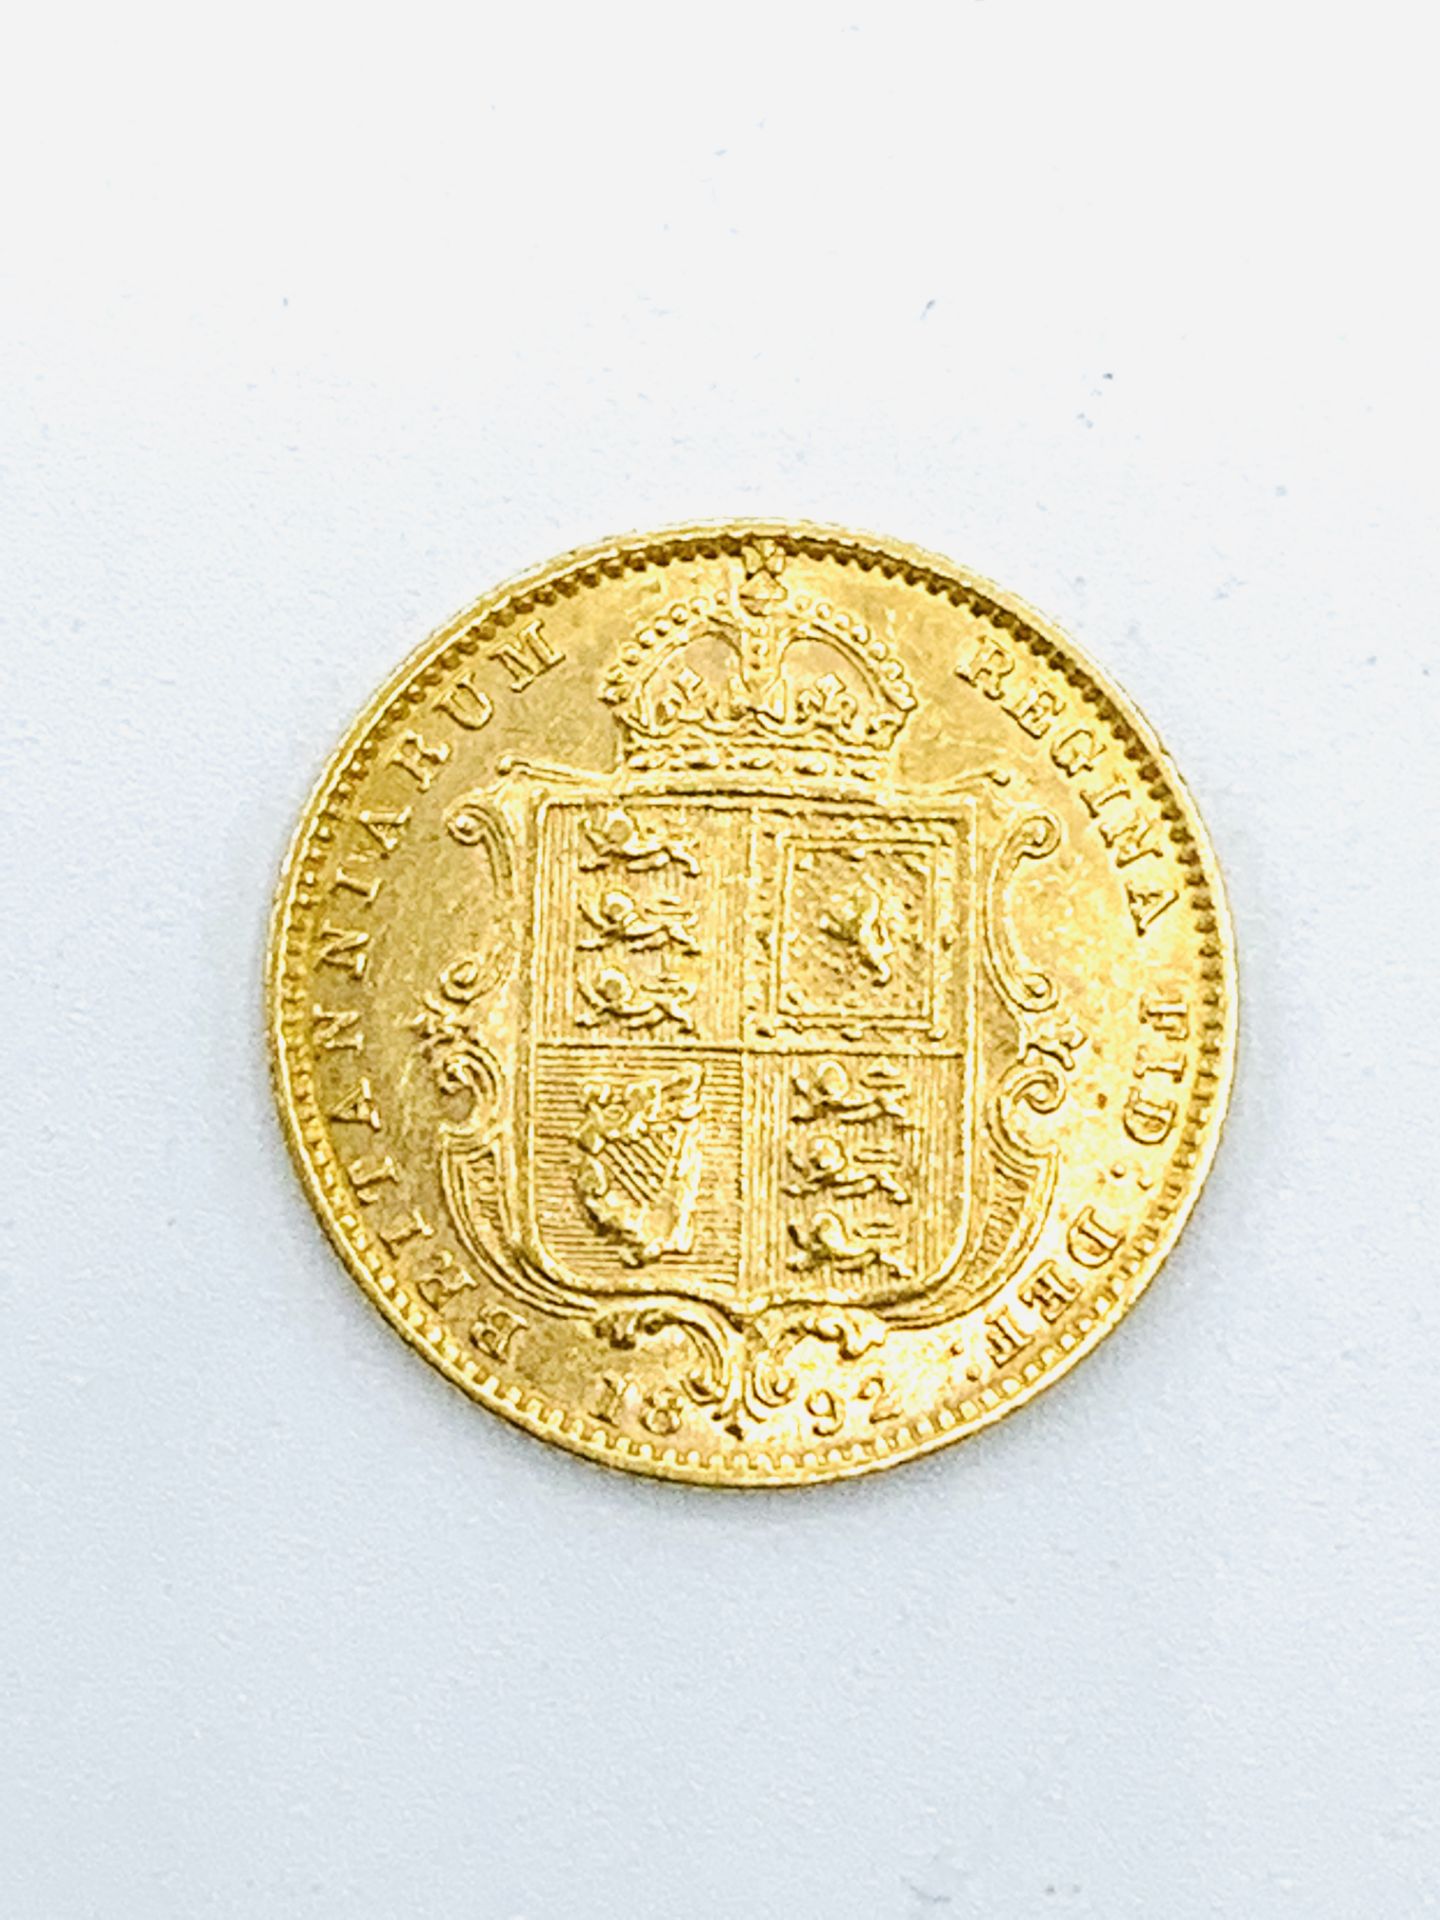 1892 gold half sovereign - Image 2 of 2